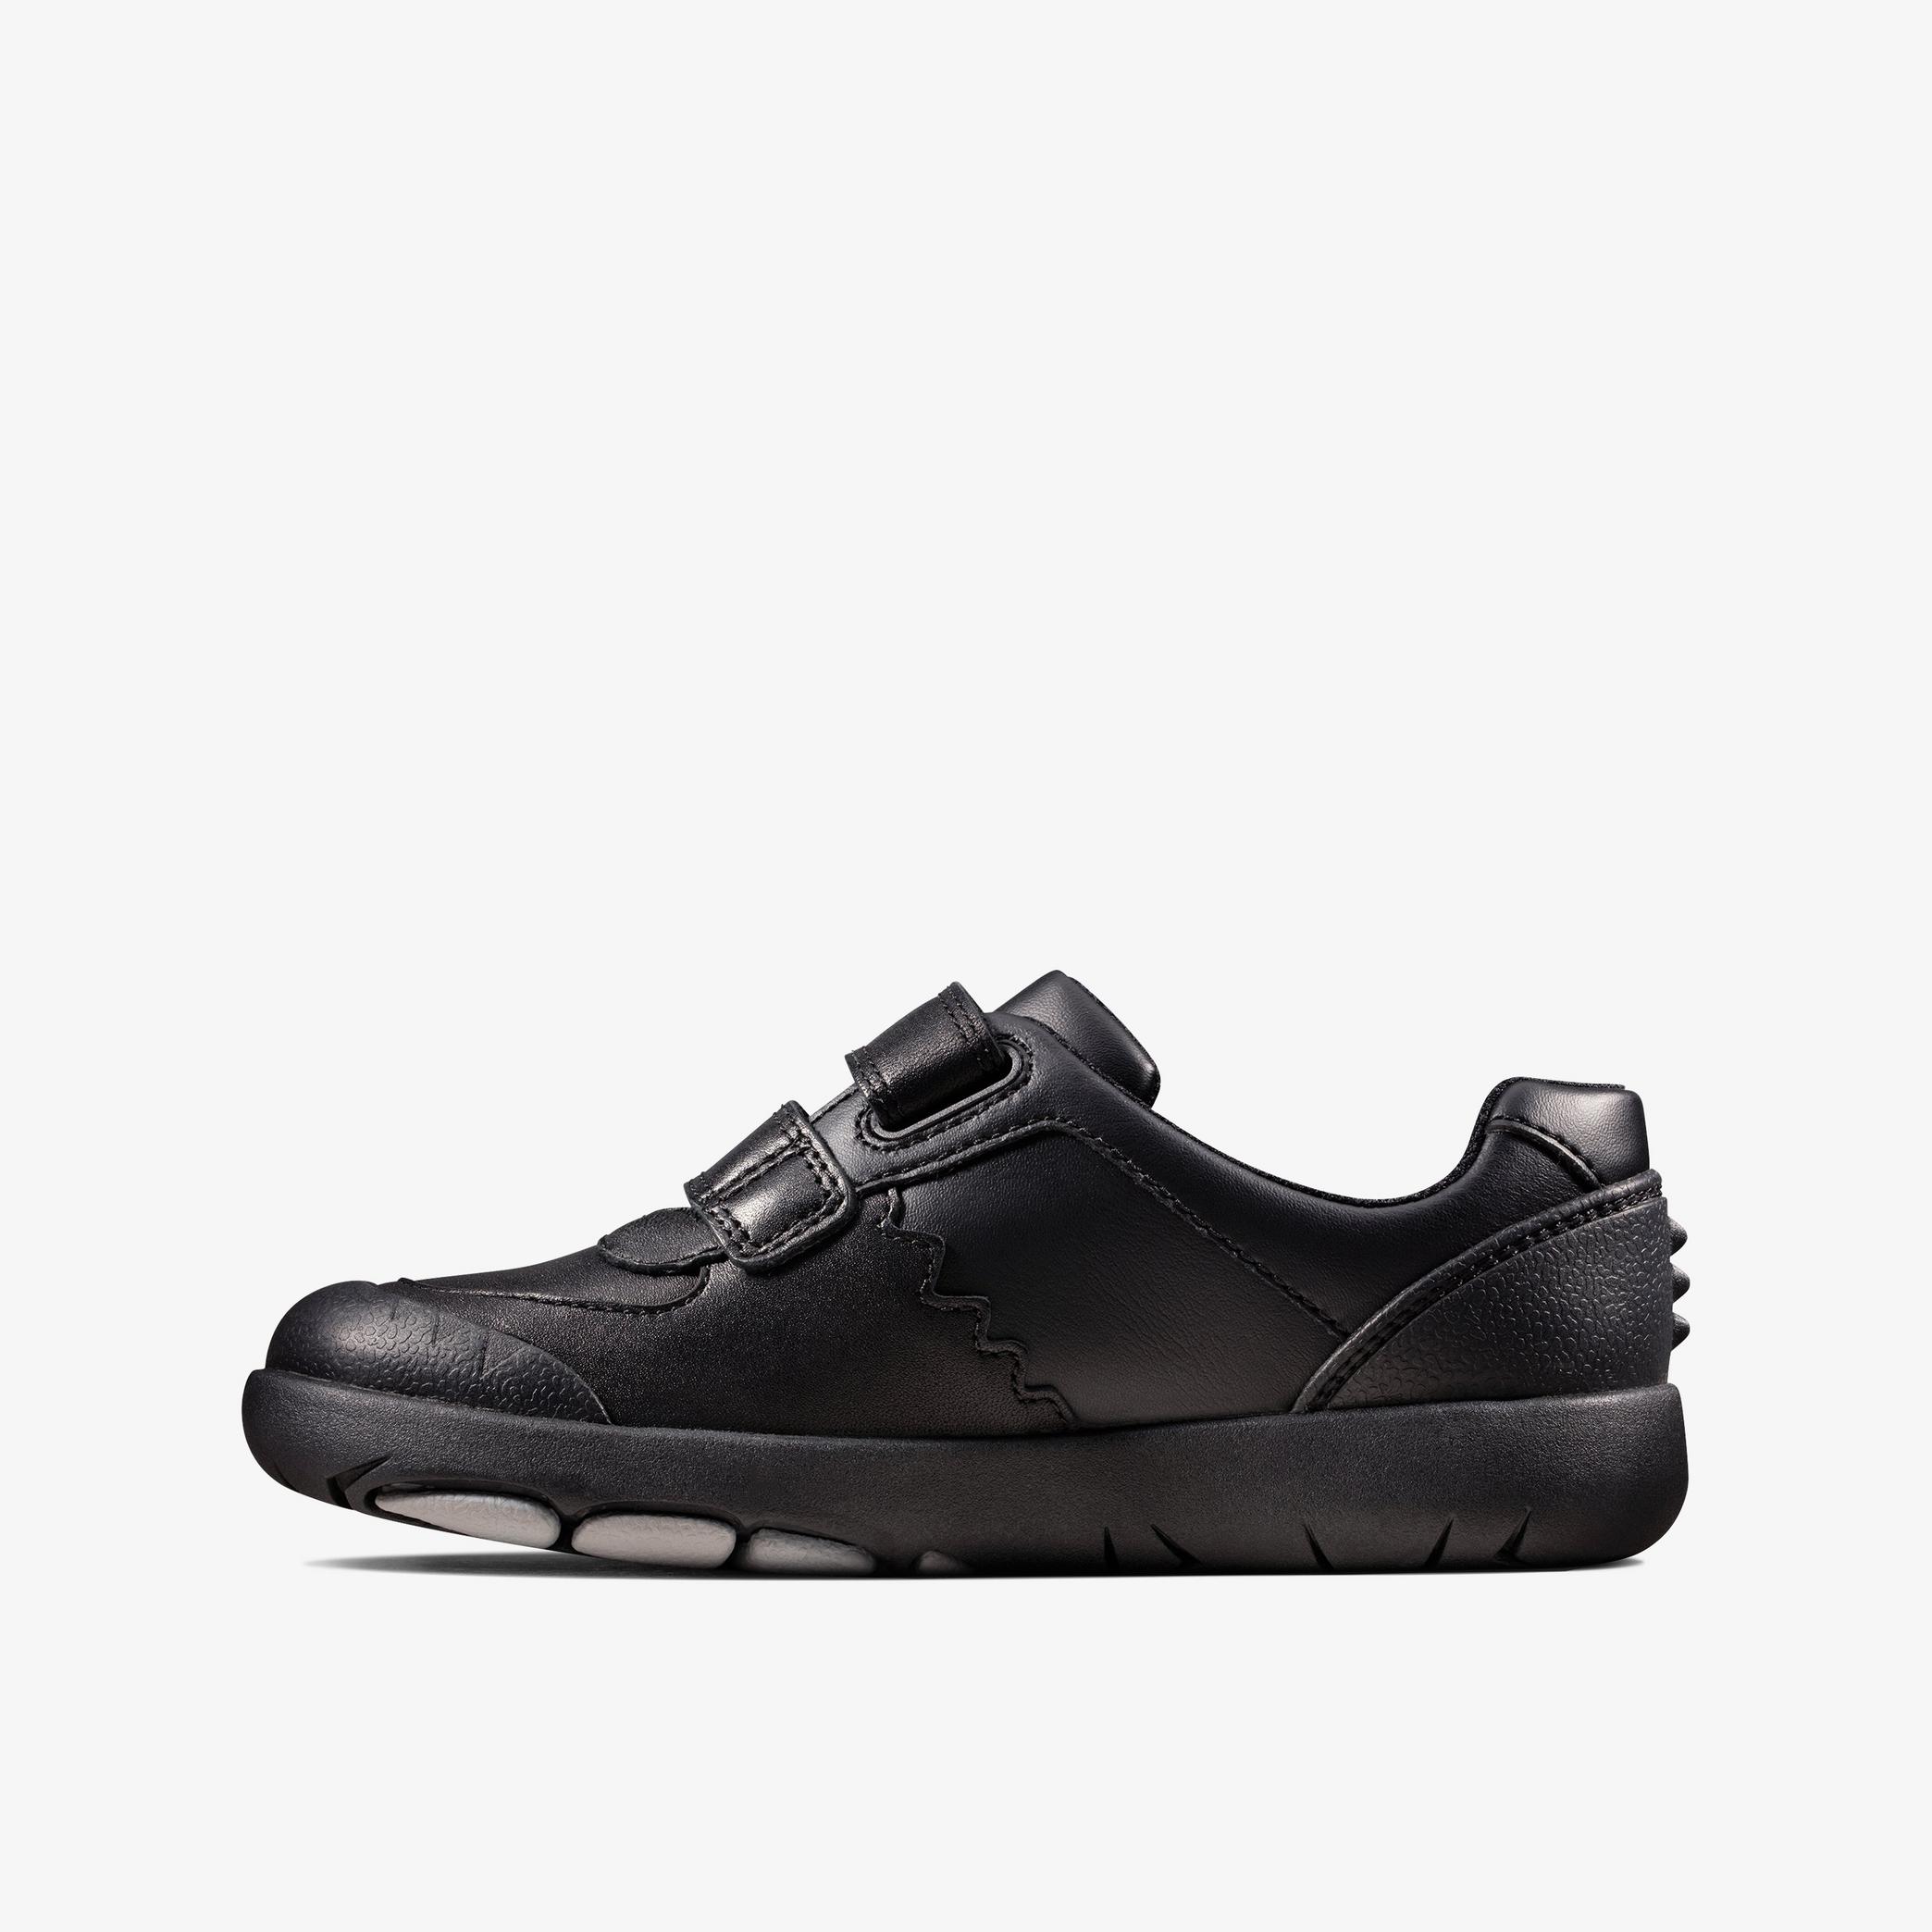 Rex Pace Kid Black Leather Shoes, view 2 of 6